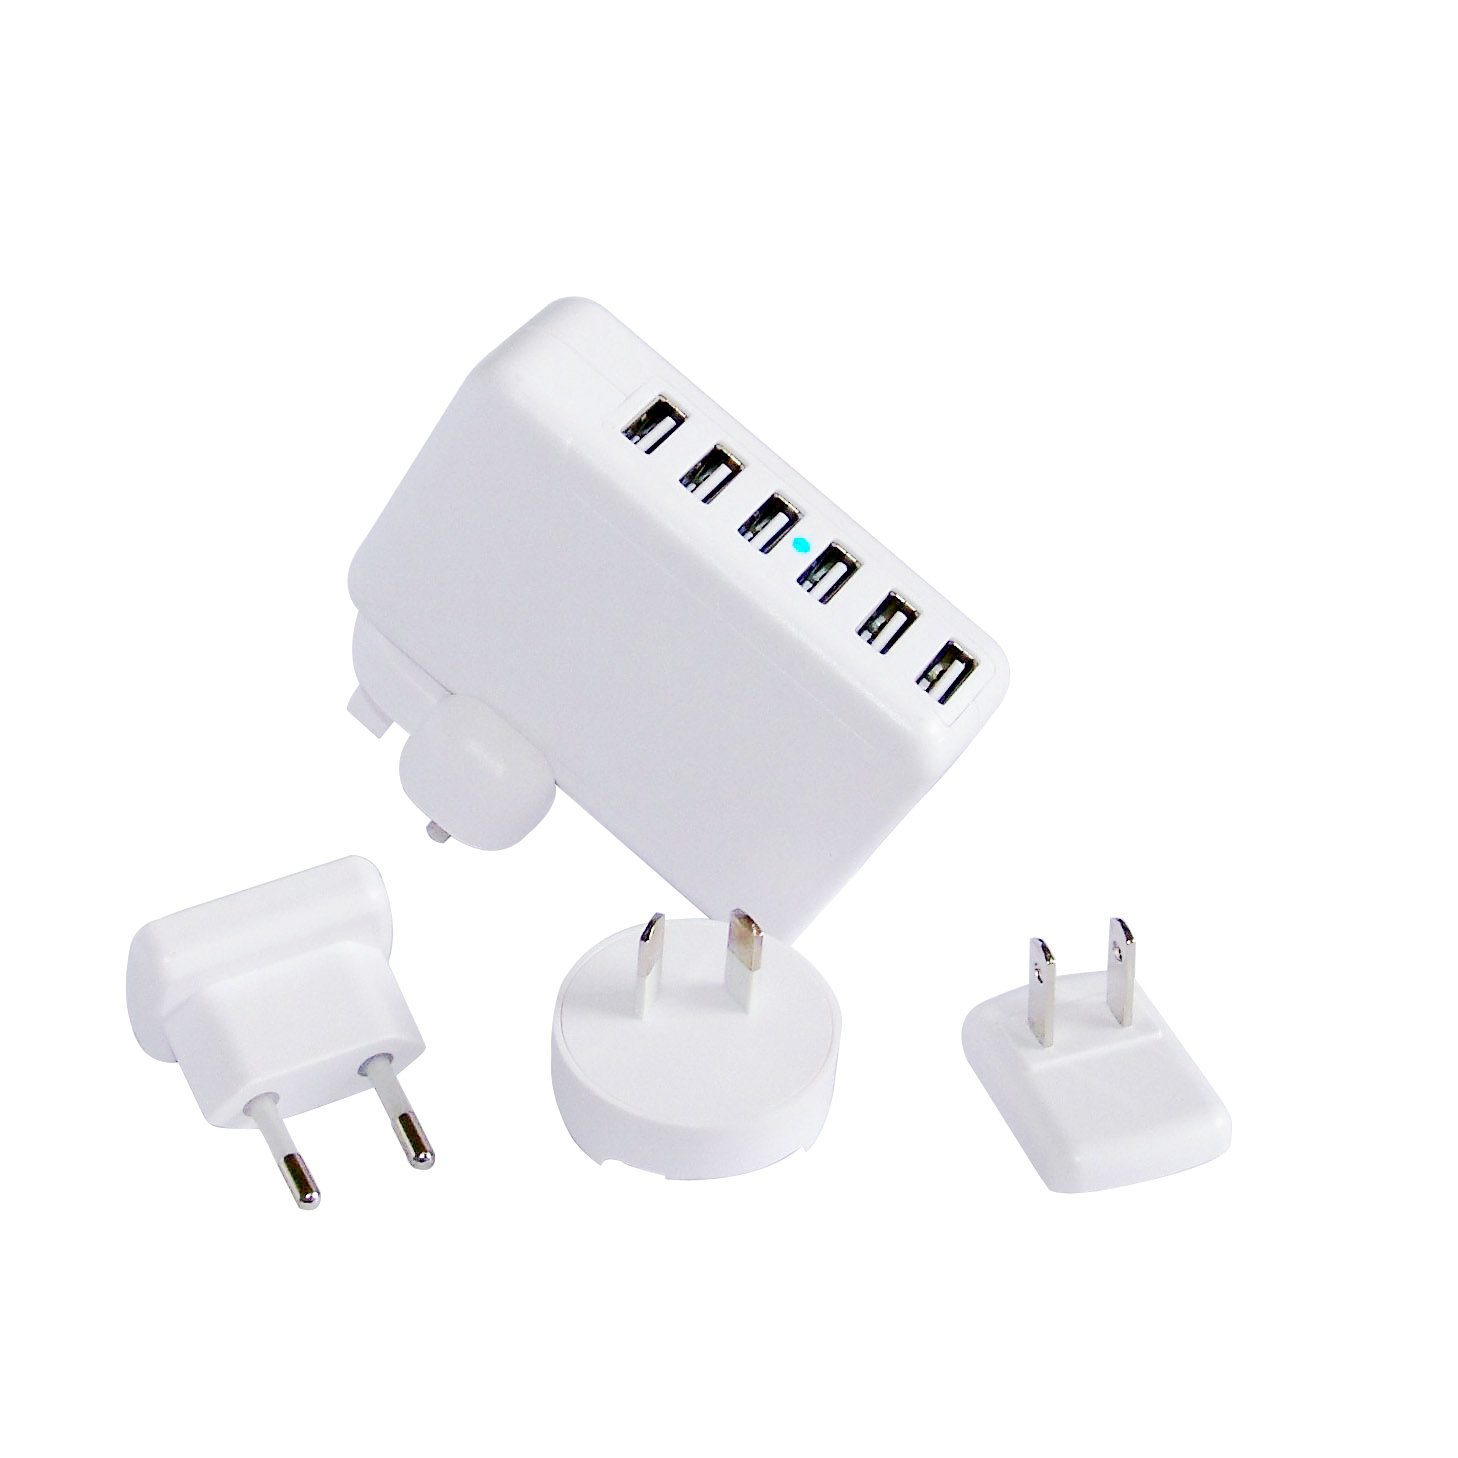 6USB multi-port travel charger certified...